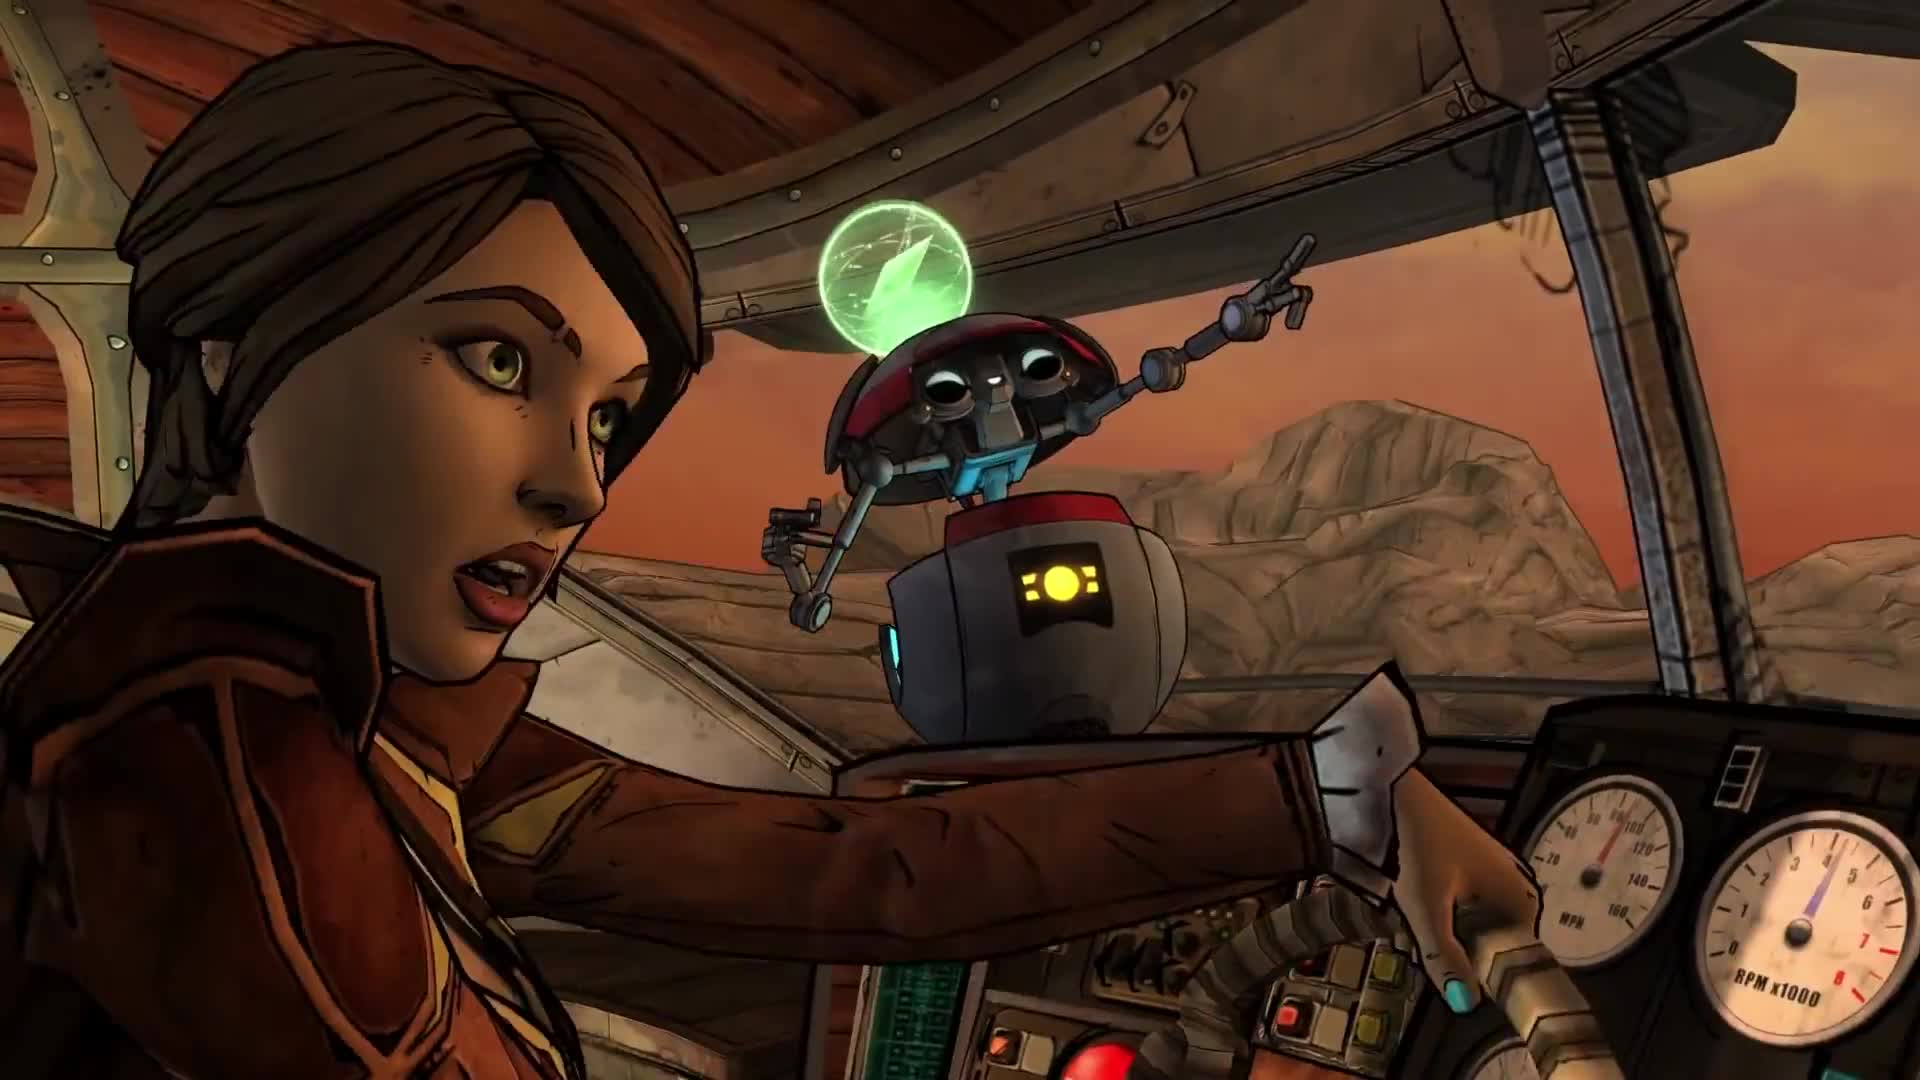 Tales from Borderlands - Episode 3 - Catch a Ride